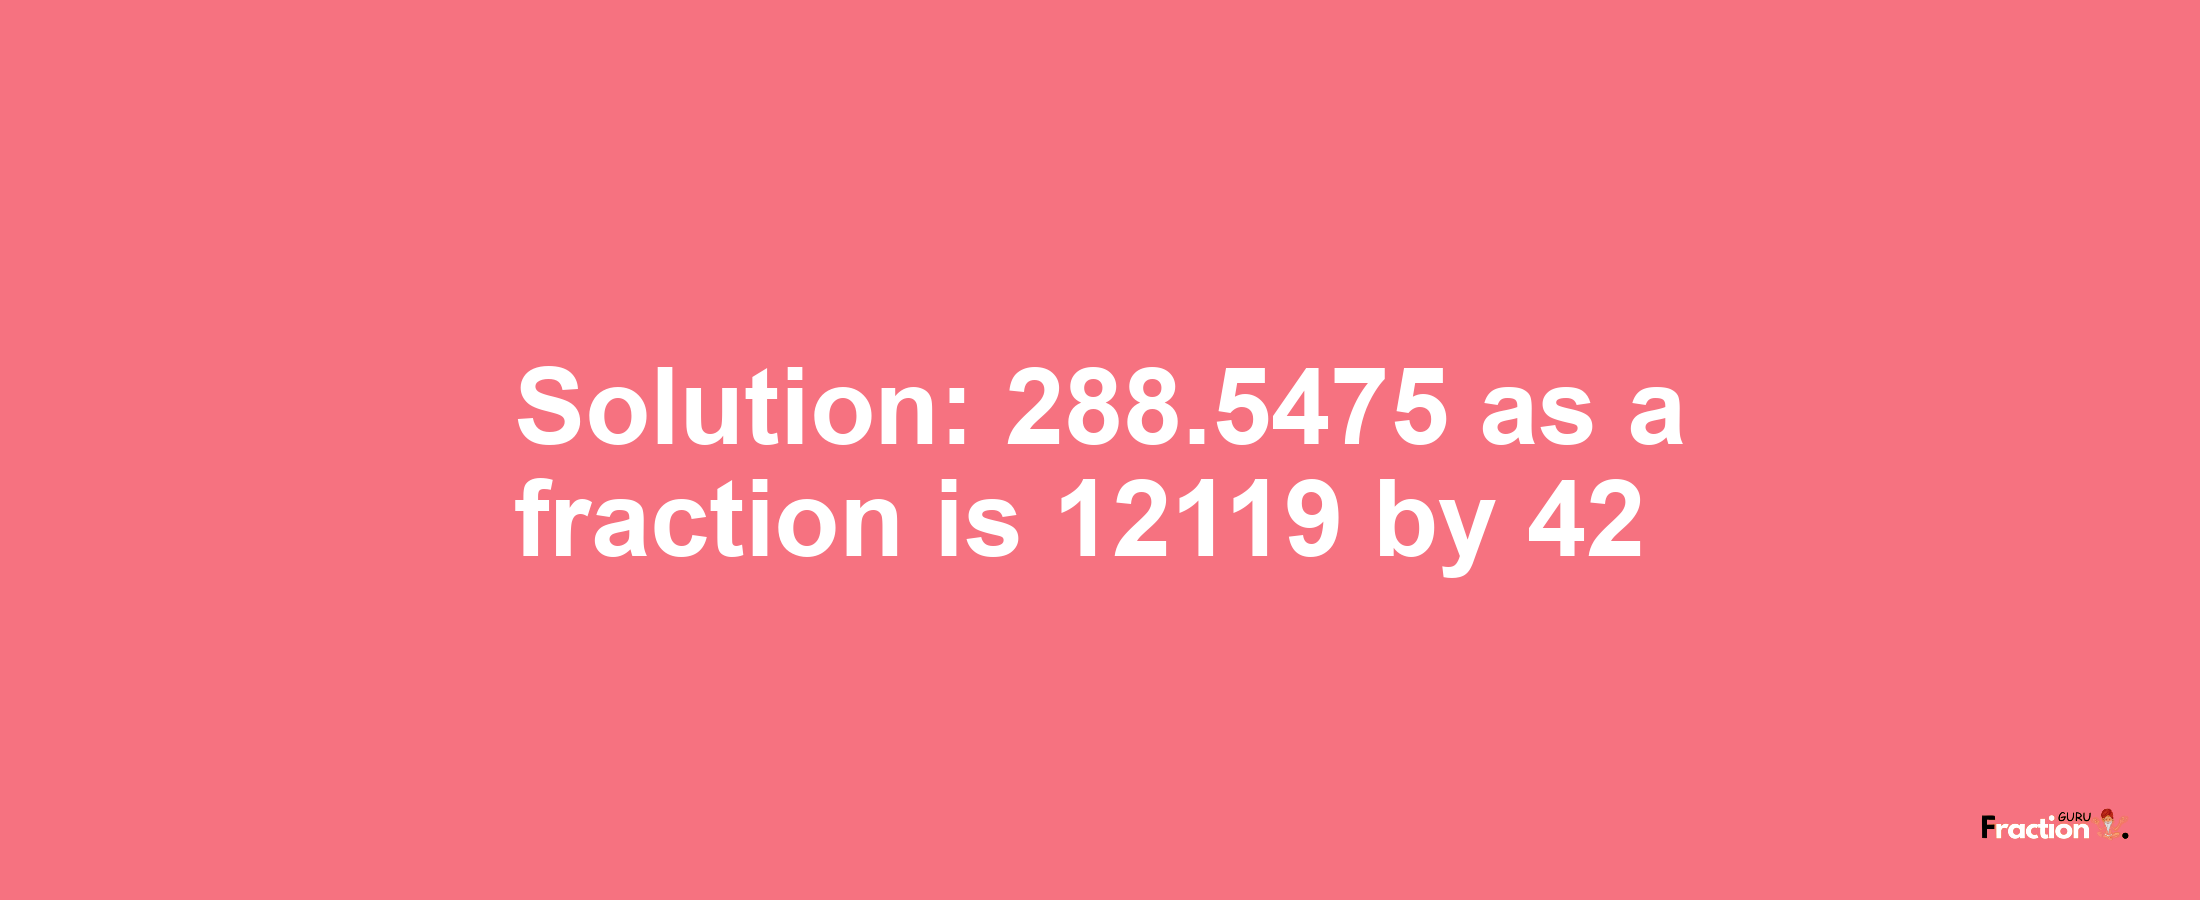 Solution:288.5475 as a fraction is 12119/42